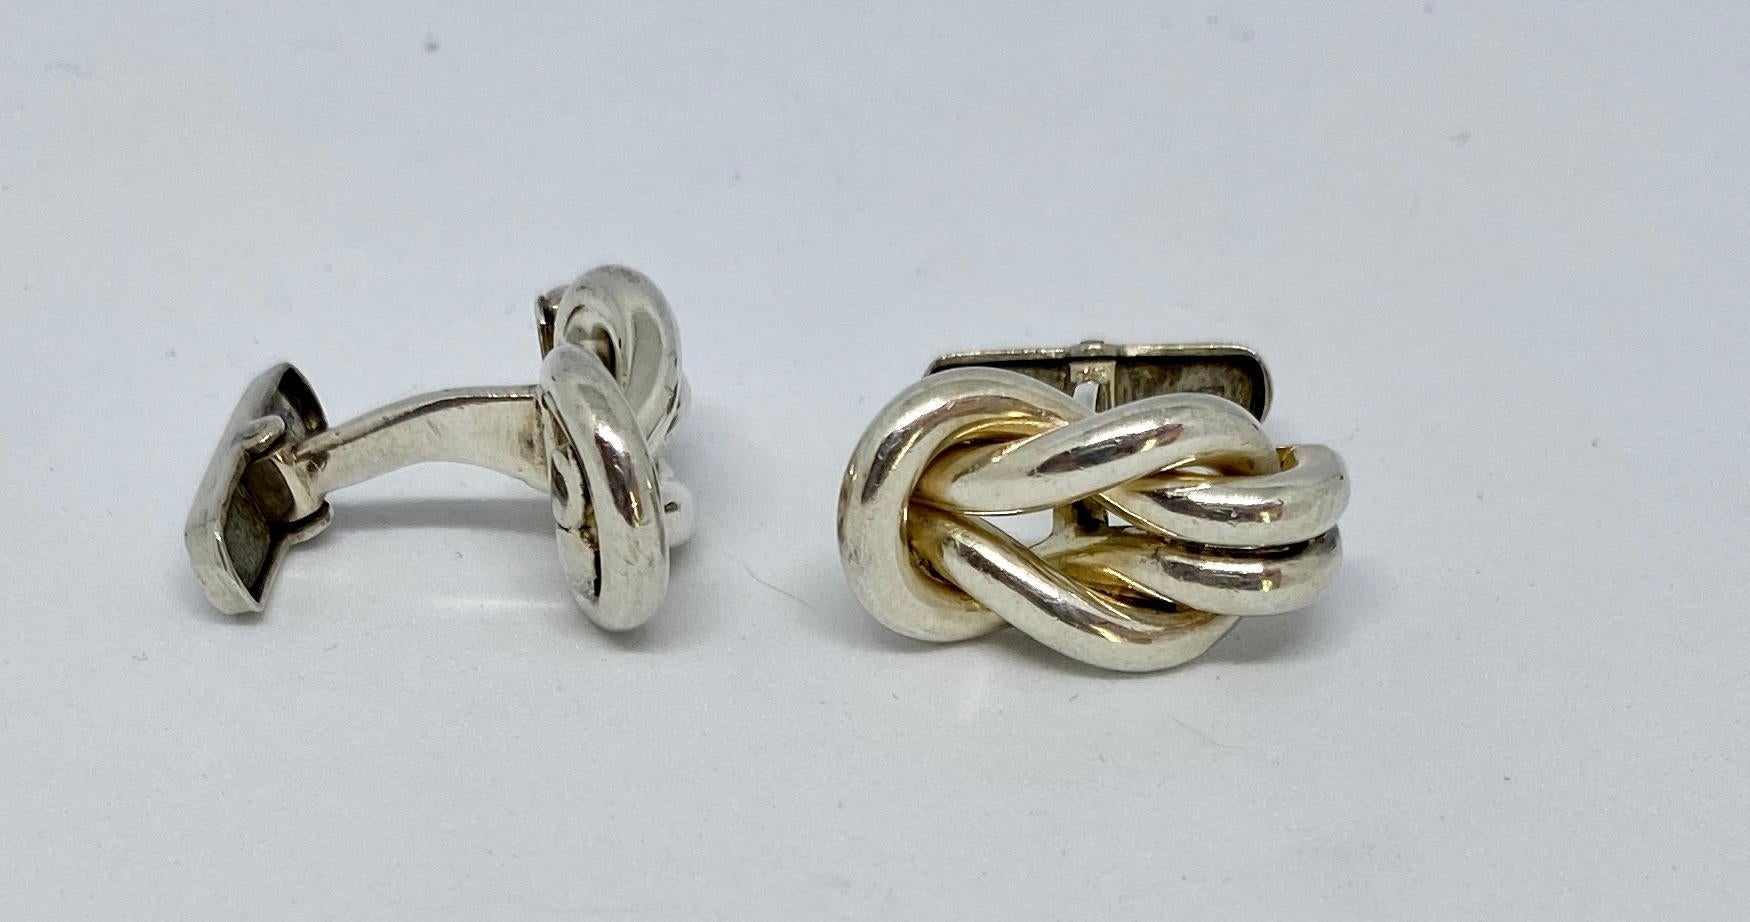 Chosen as the house symbol for the year 2021, the Hercules knot is an ancient motif symbolizing strength, love and protection long associated with Ilias LALAoUNIS.

These vintage cufflinks, hand-made in heavy, sterling silver, feature Hercules knots